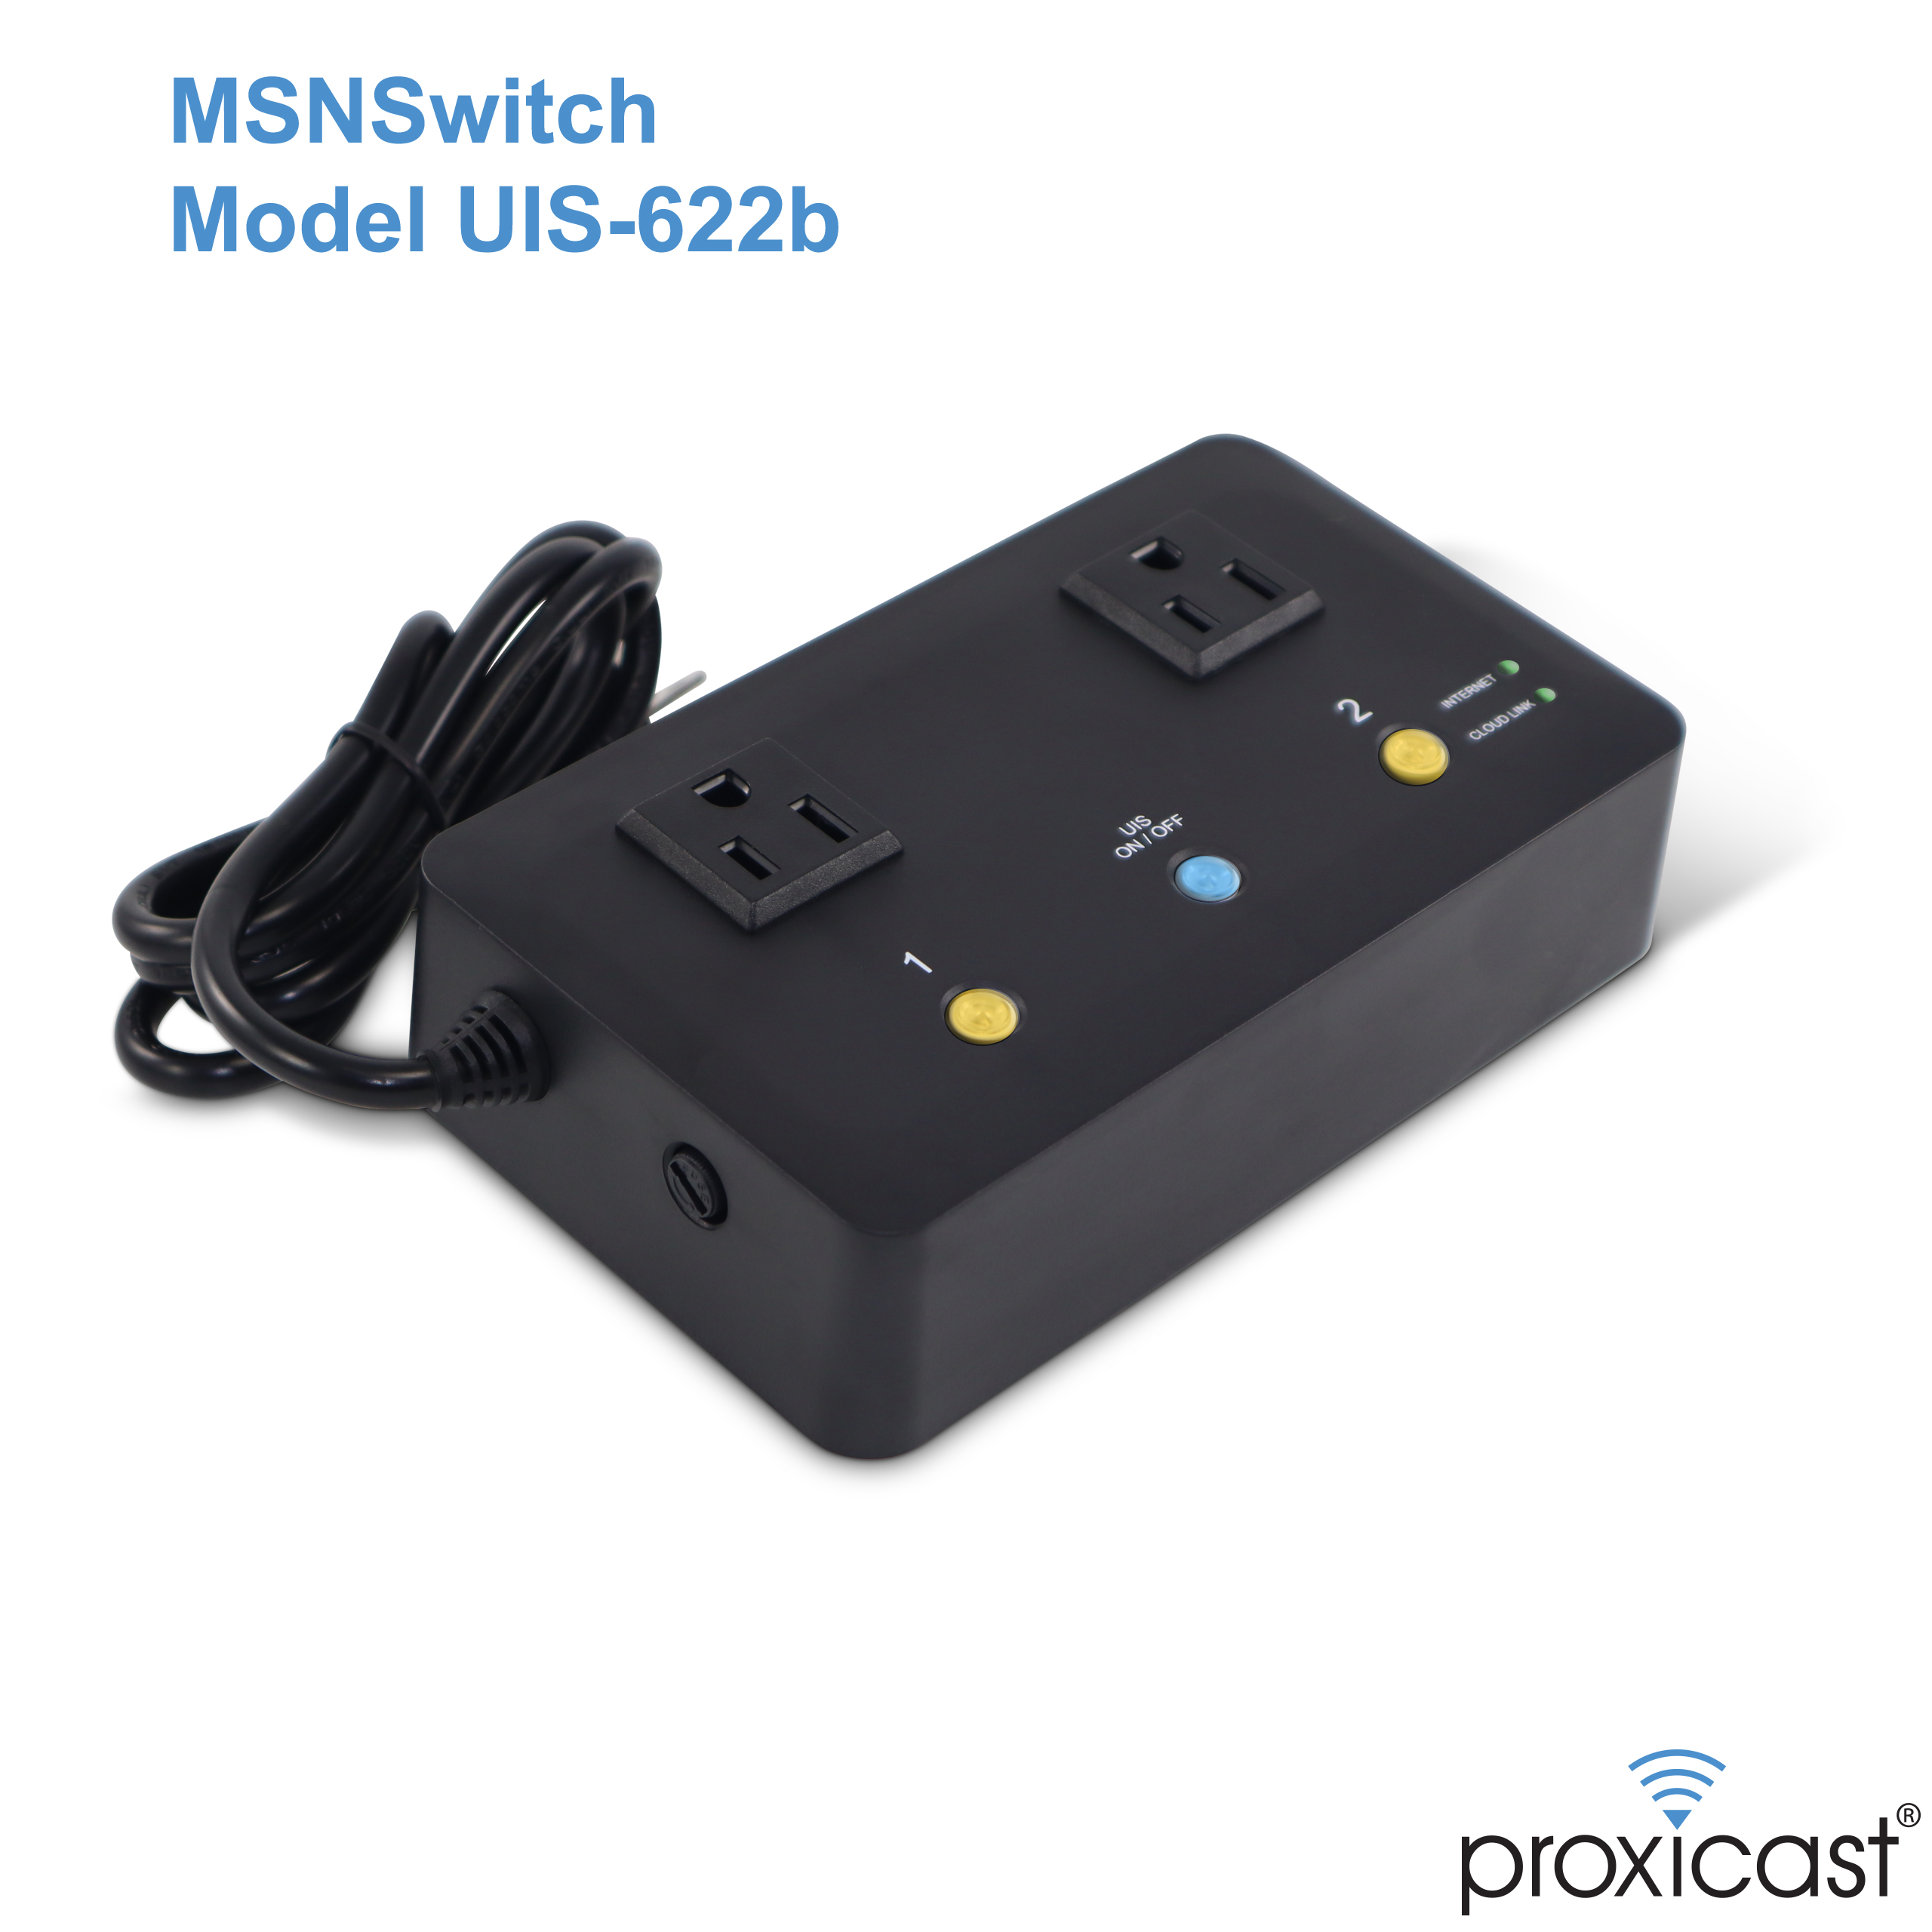 Proxicast: MSNSwitch Model UIS-622b